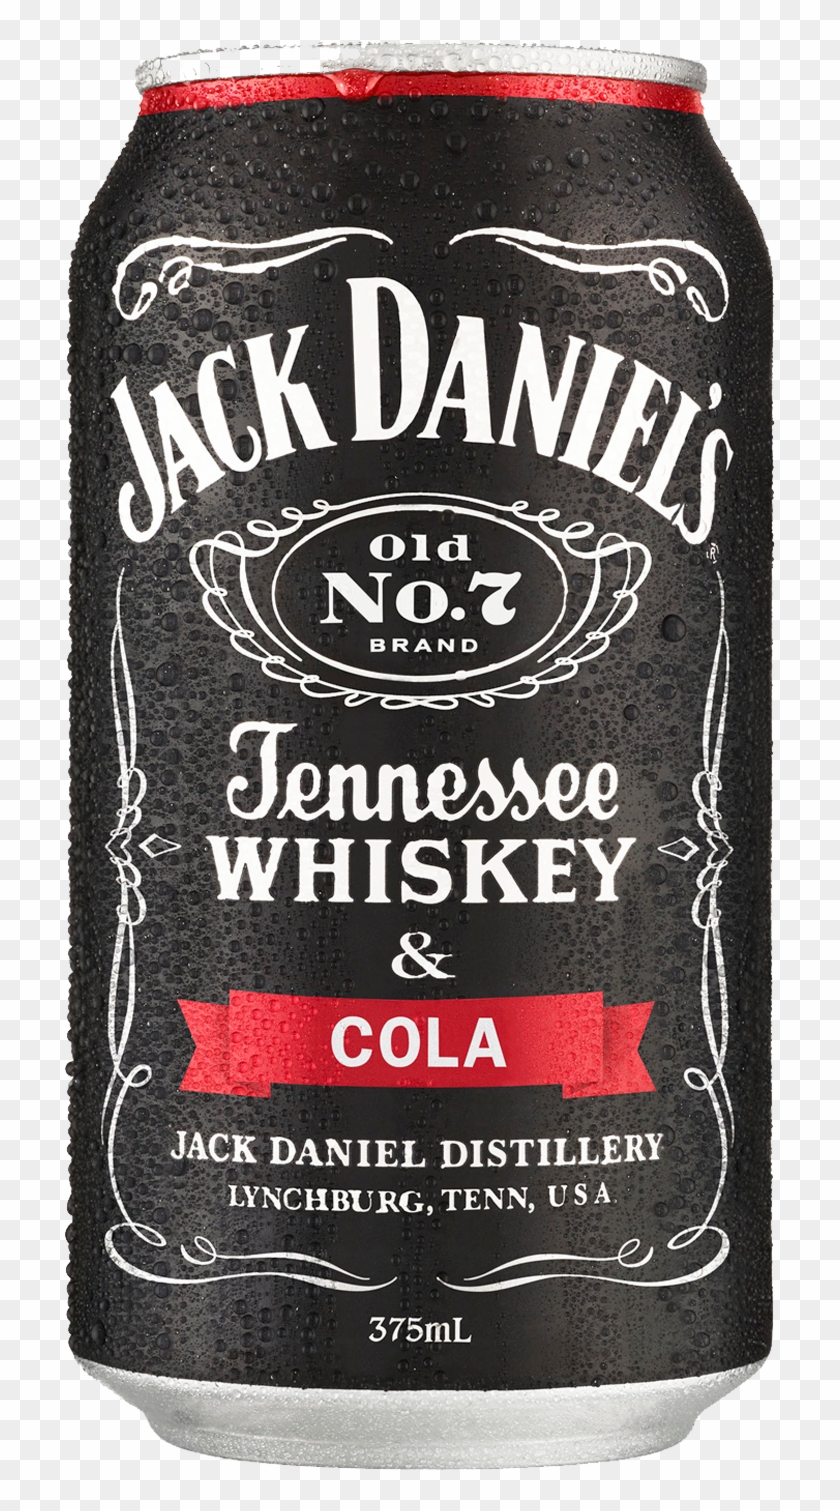 Jack Daniel's Tennessee Whiskey & Cola Cans 10 Pack - Jack Daniels And Cola Clipart